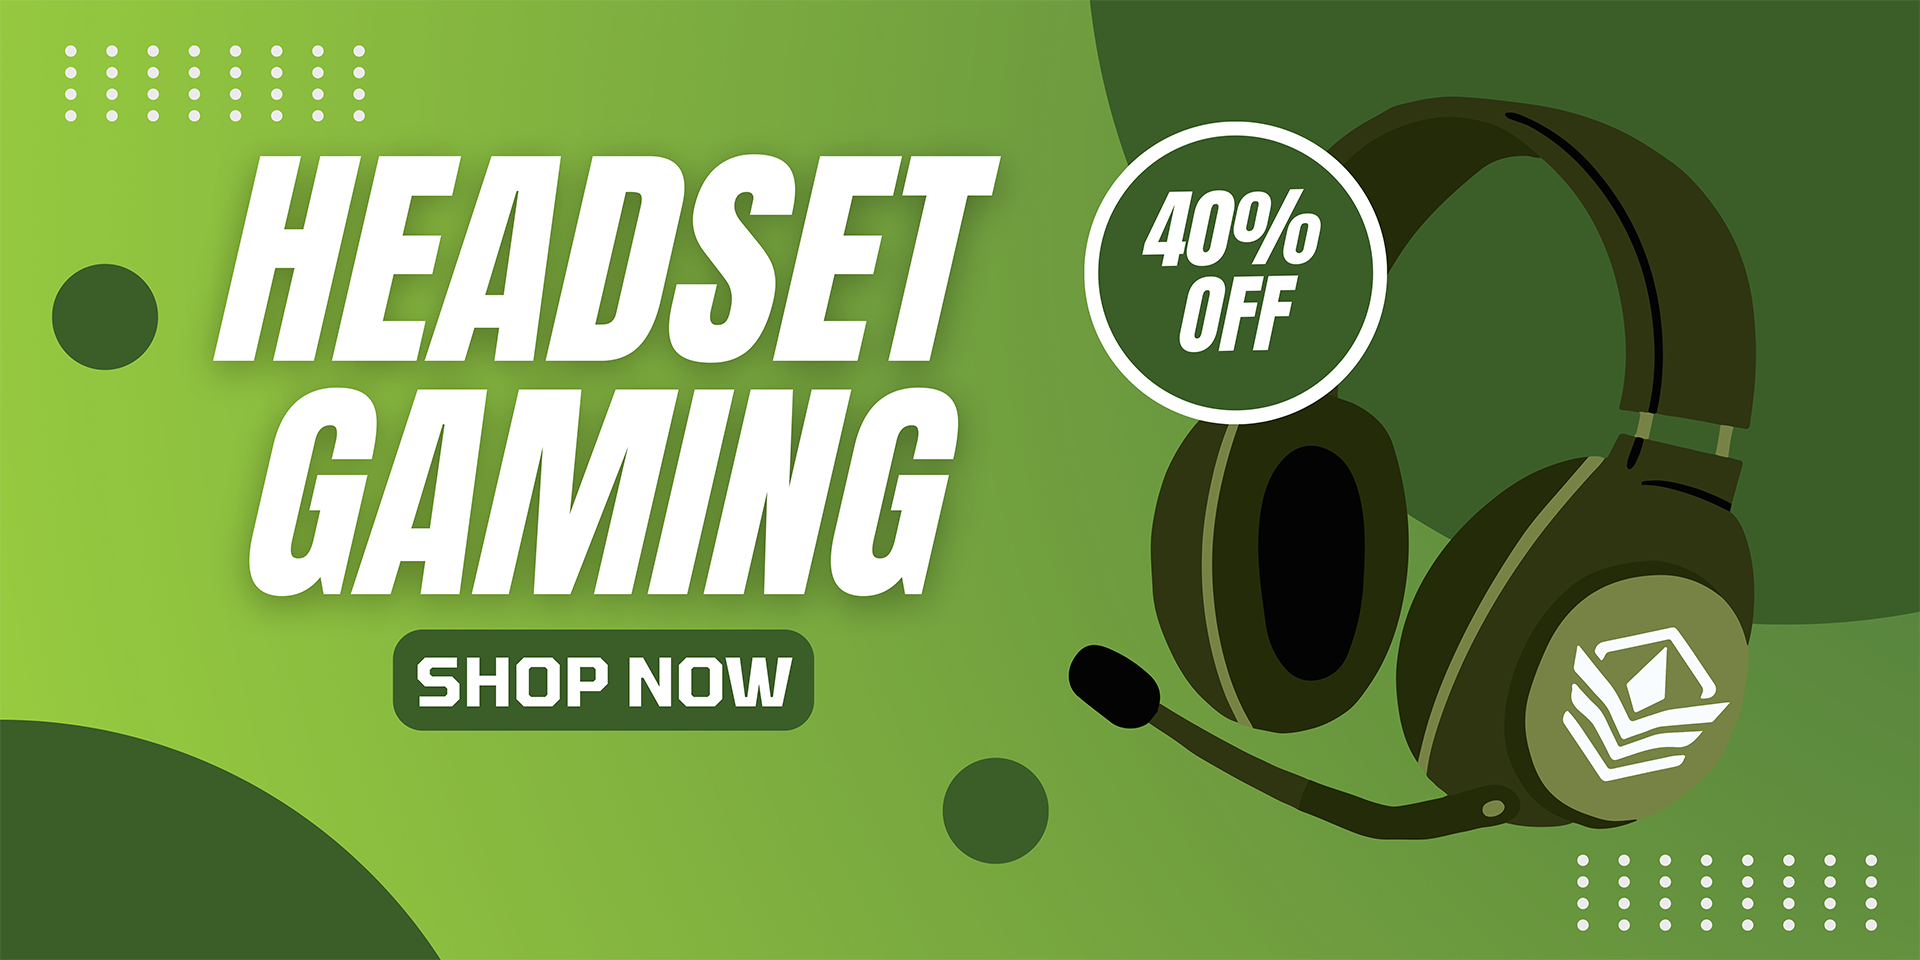 Green Simple Discount Banner